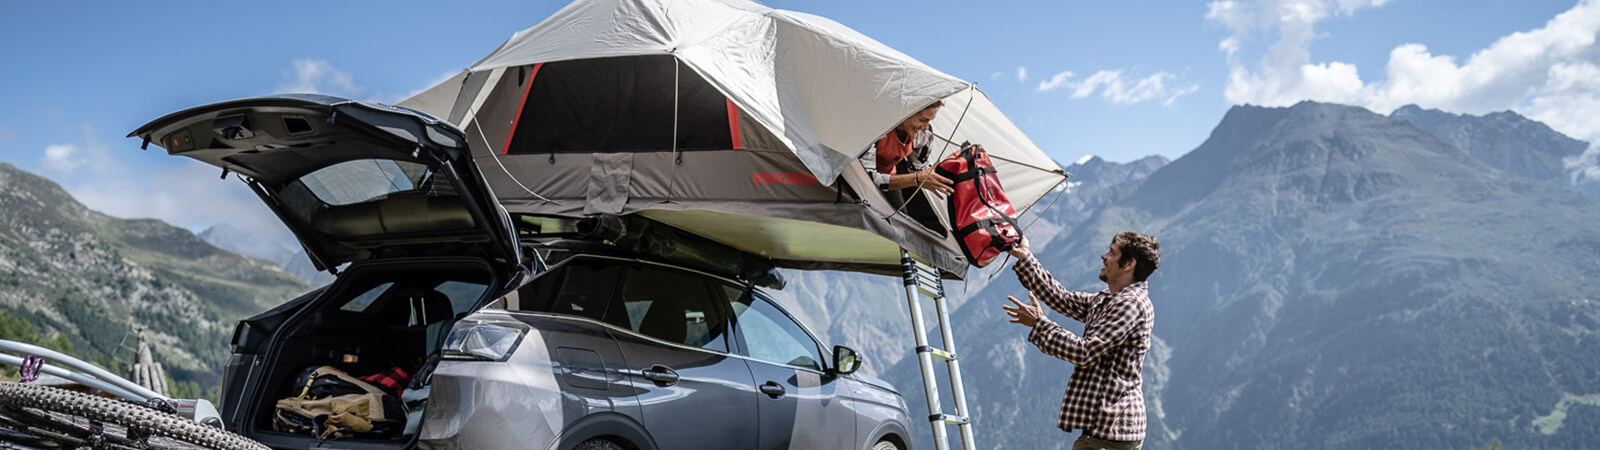 A couple set-up their roof tent on top of their vehicle in front of a mountain background